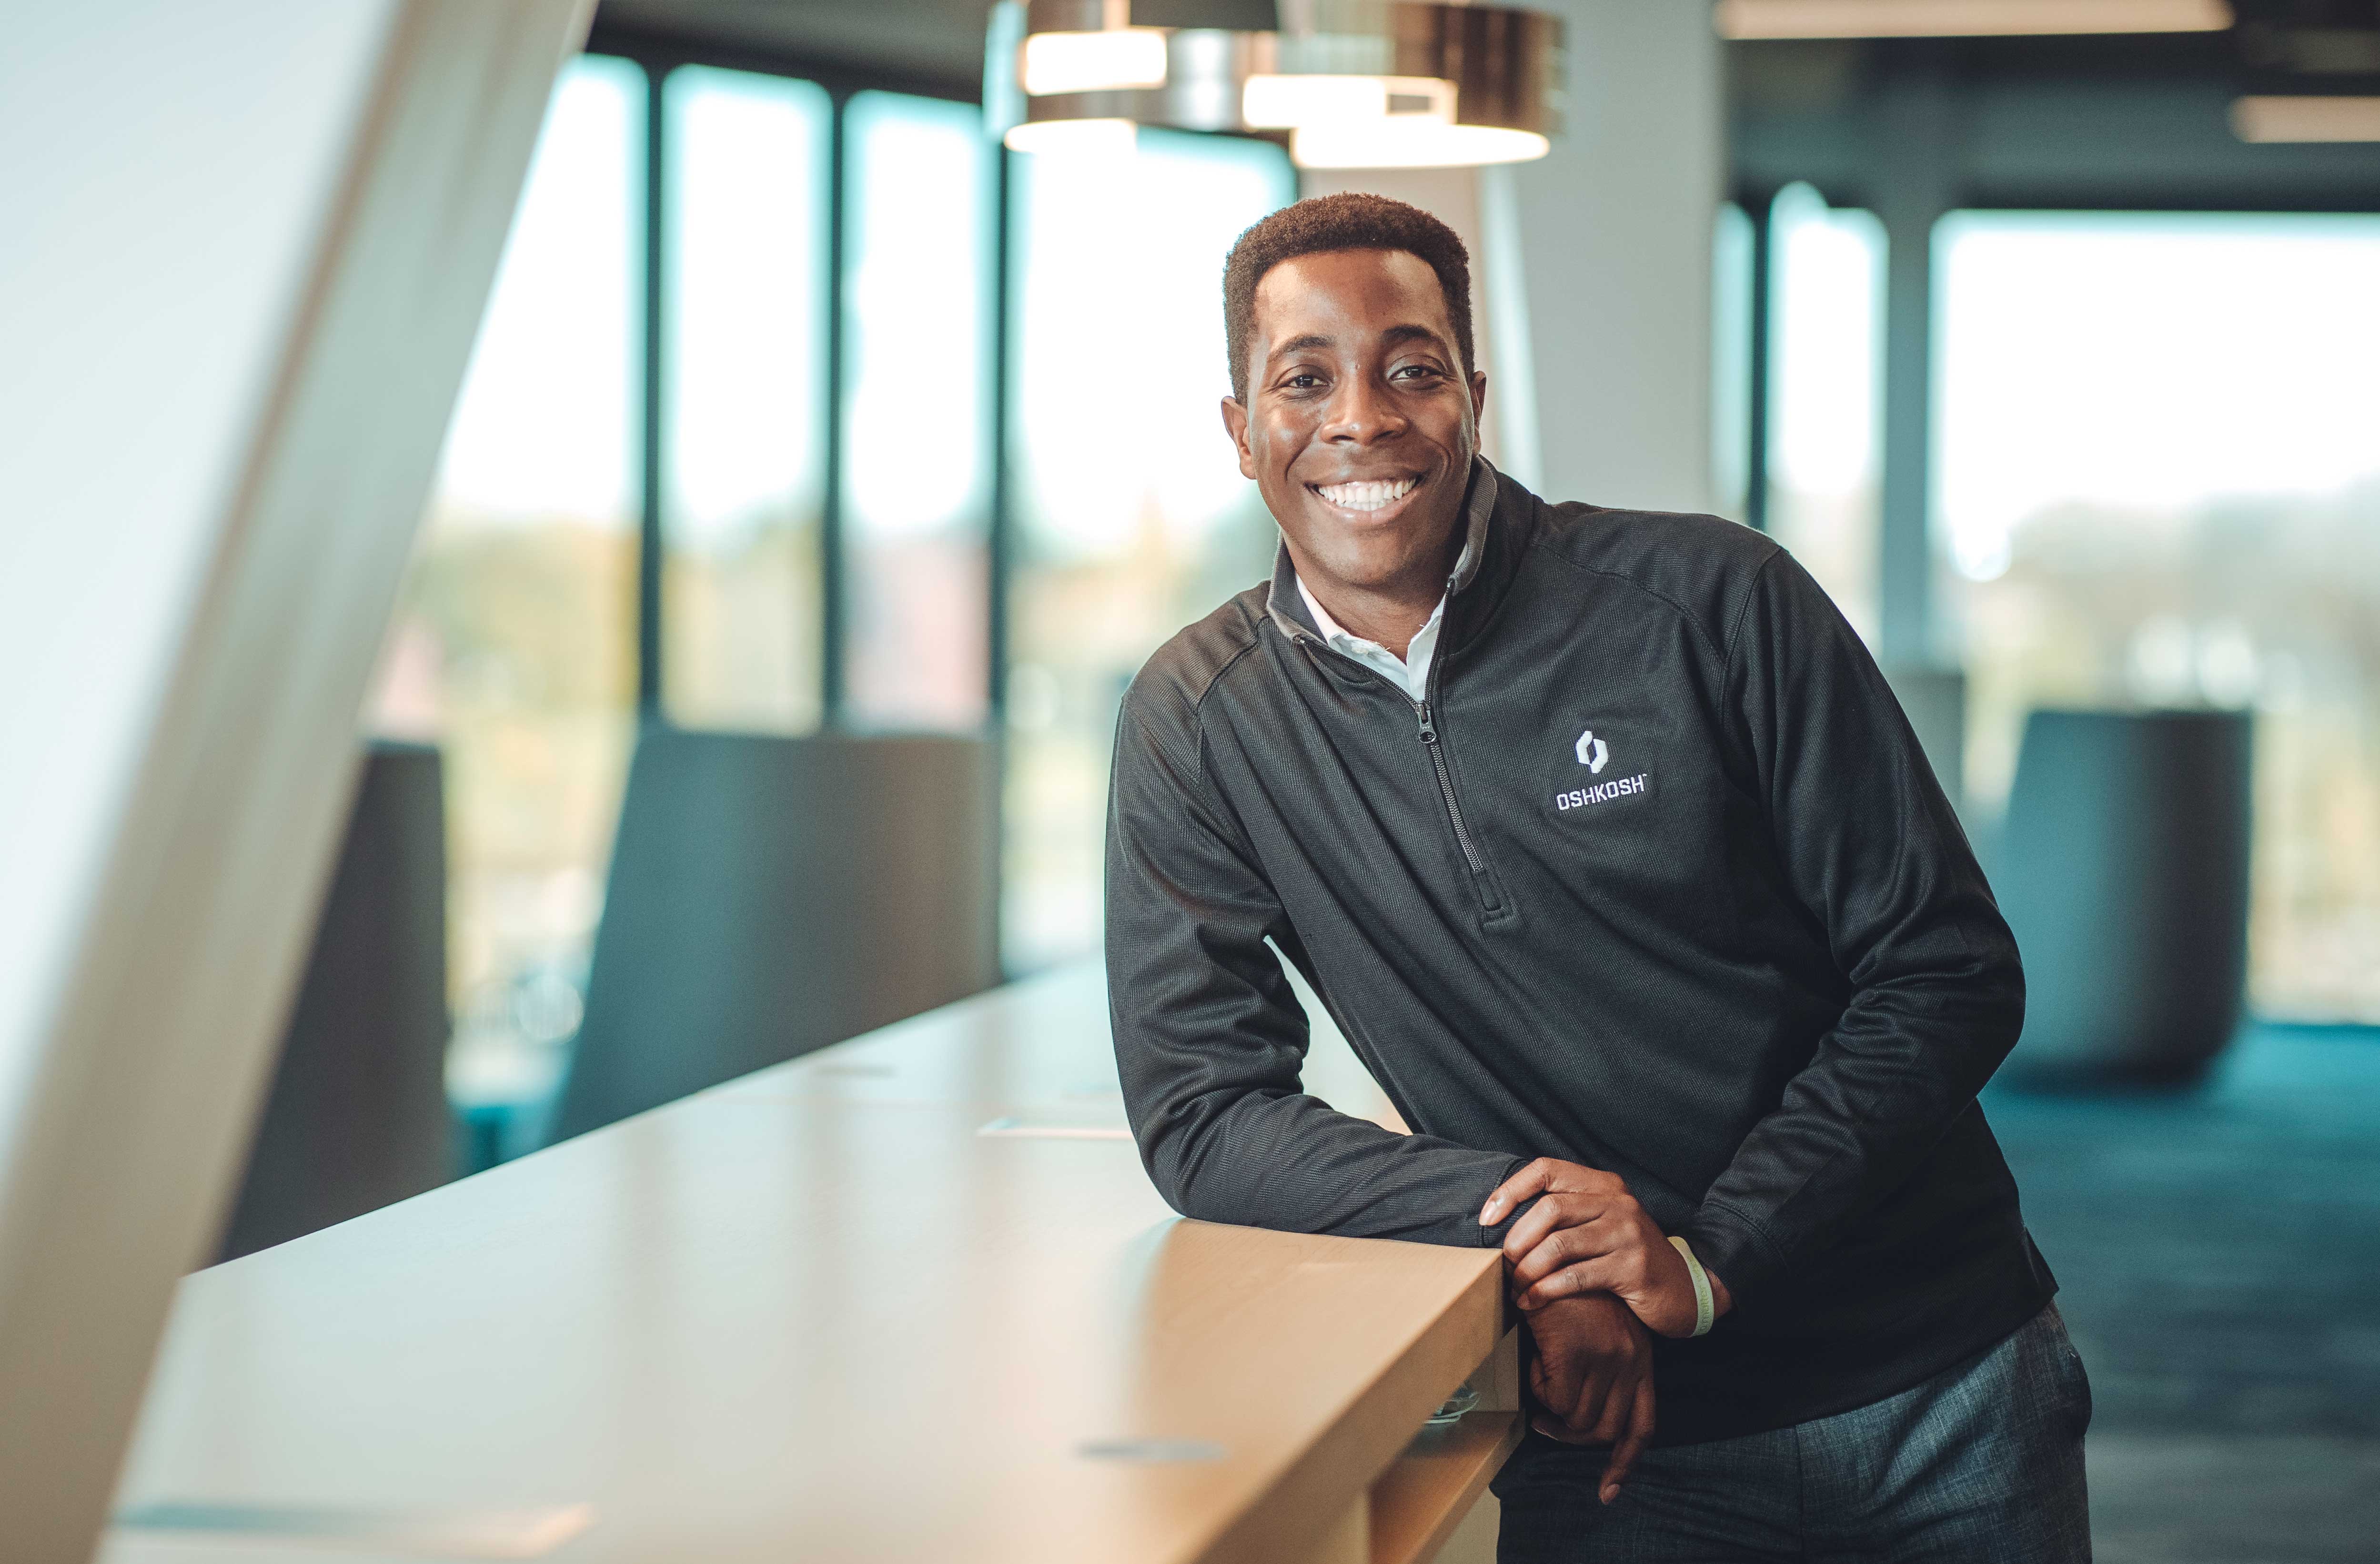 Young black man wearing a black Oshkosh 1/4 zip sweatshirt standing at a tall table in an office setting